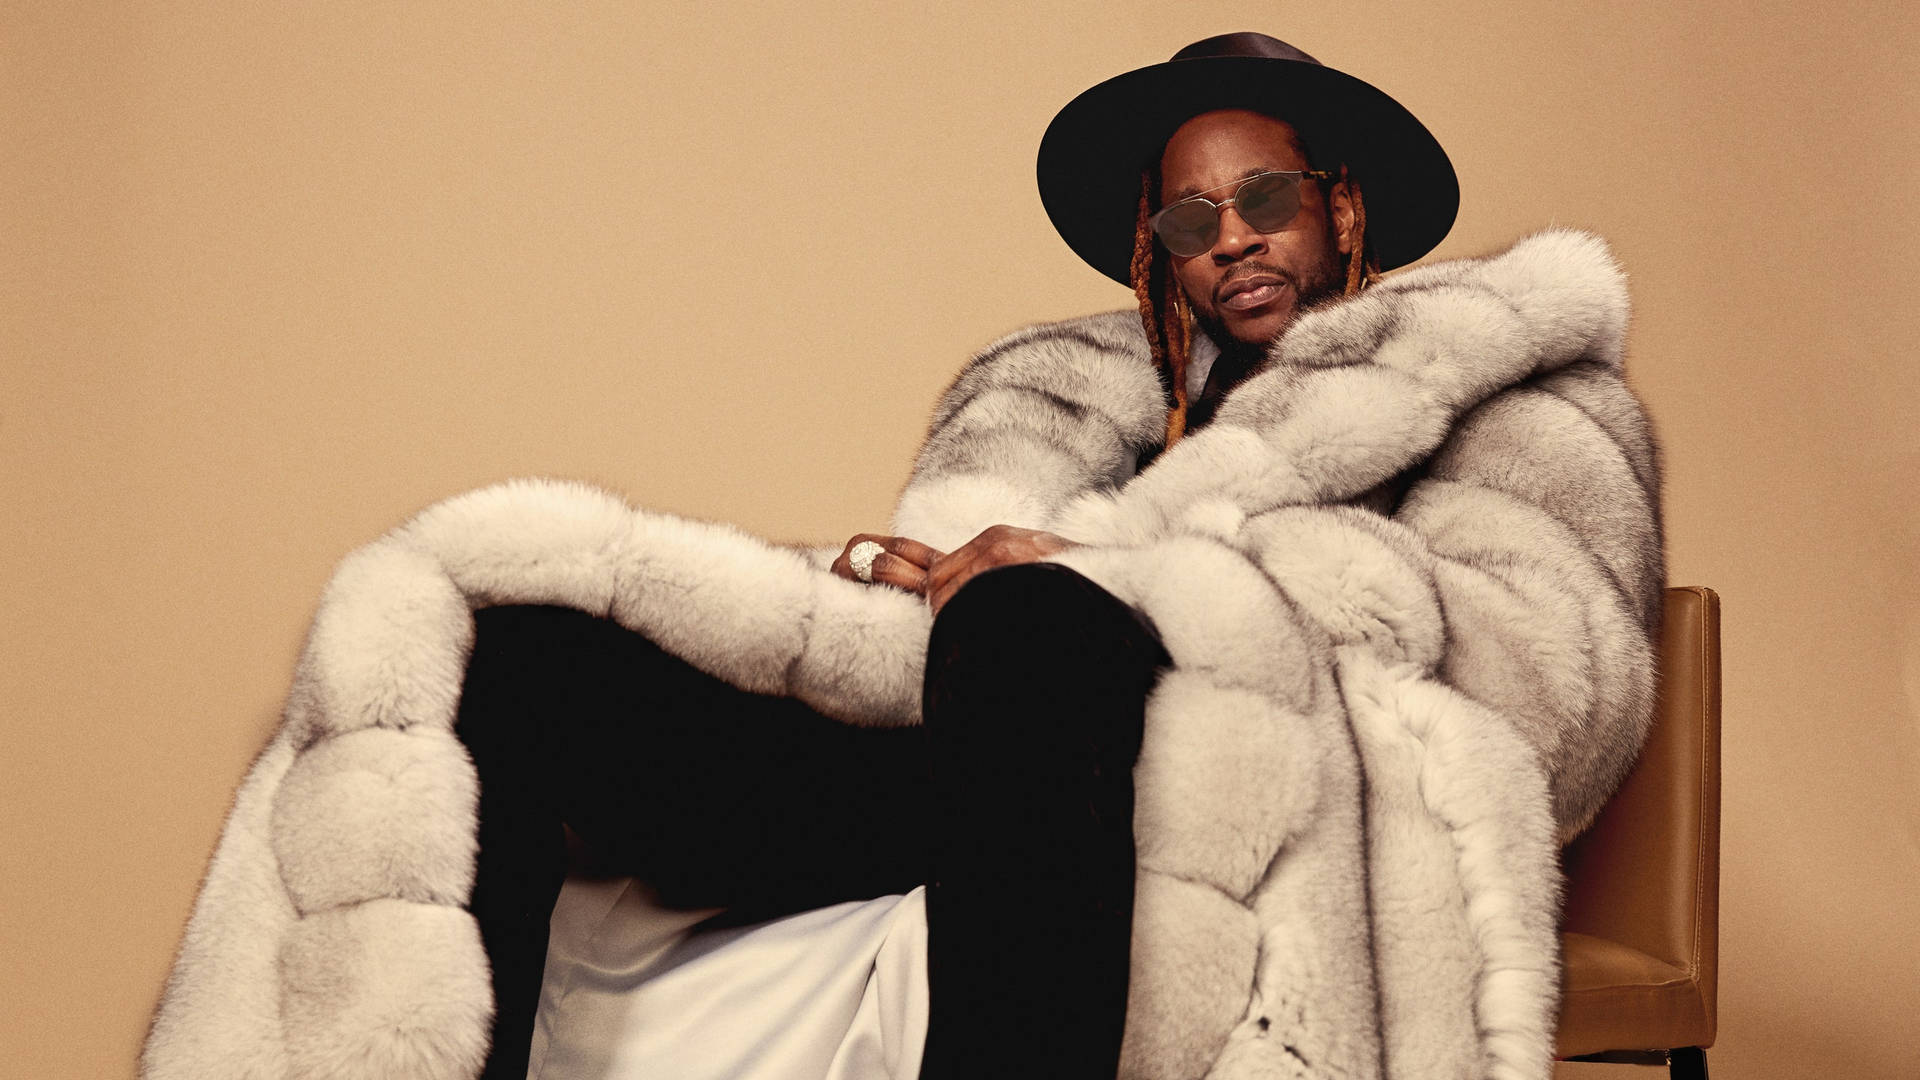 2 Chainz Gq Photoshoot Picture